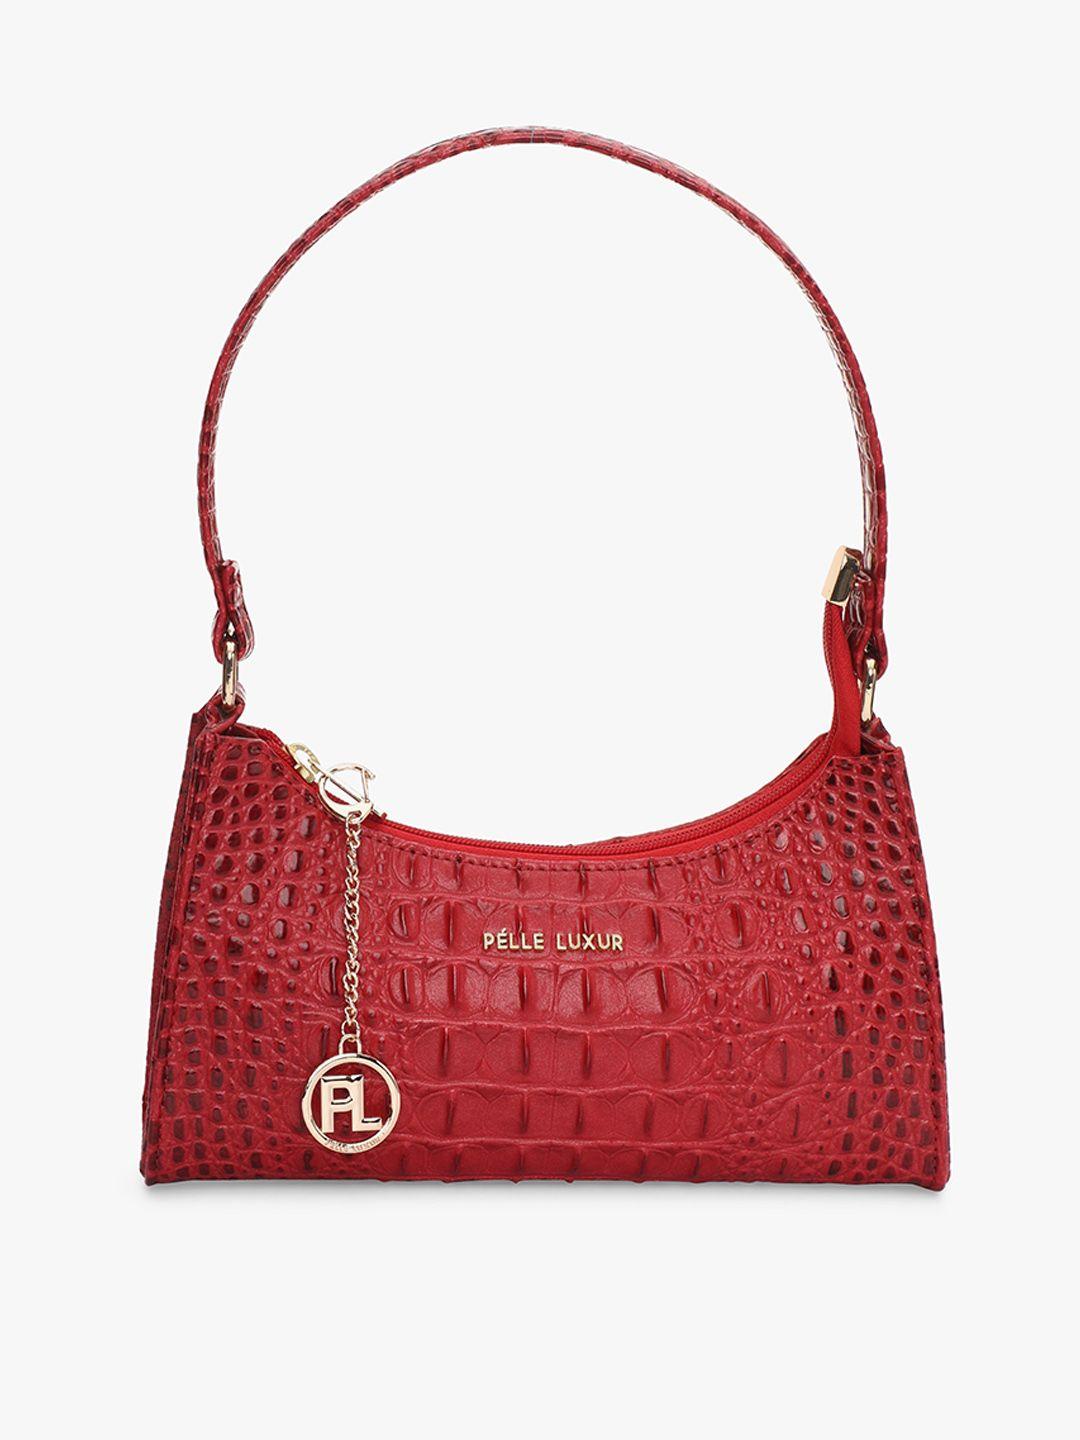 pelle luxur textured structured hobo bag with quilted